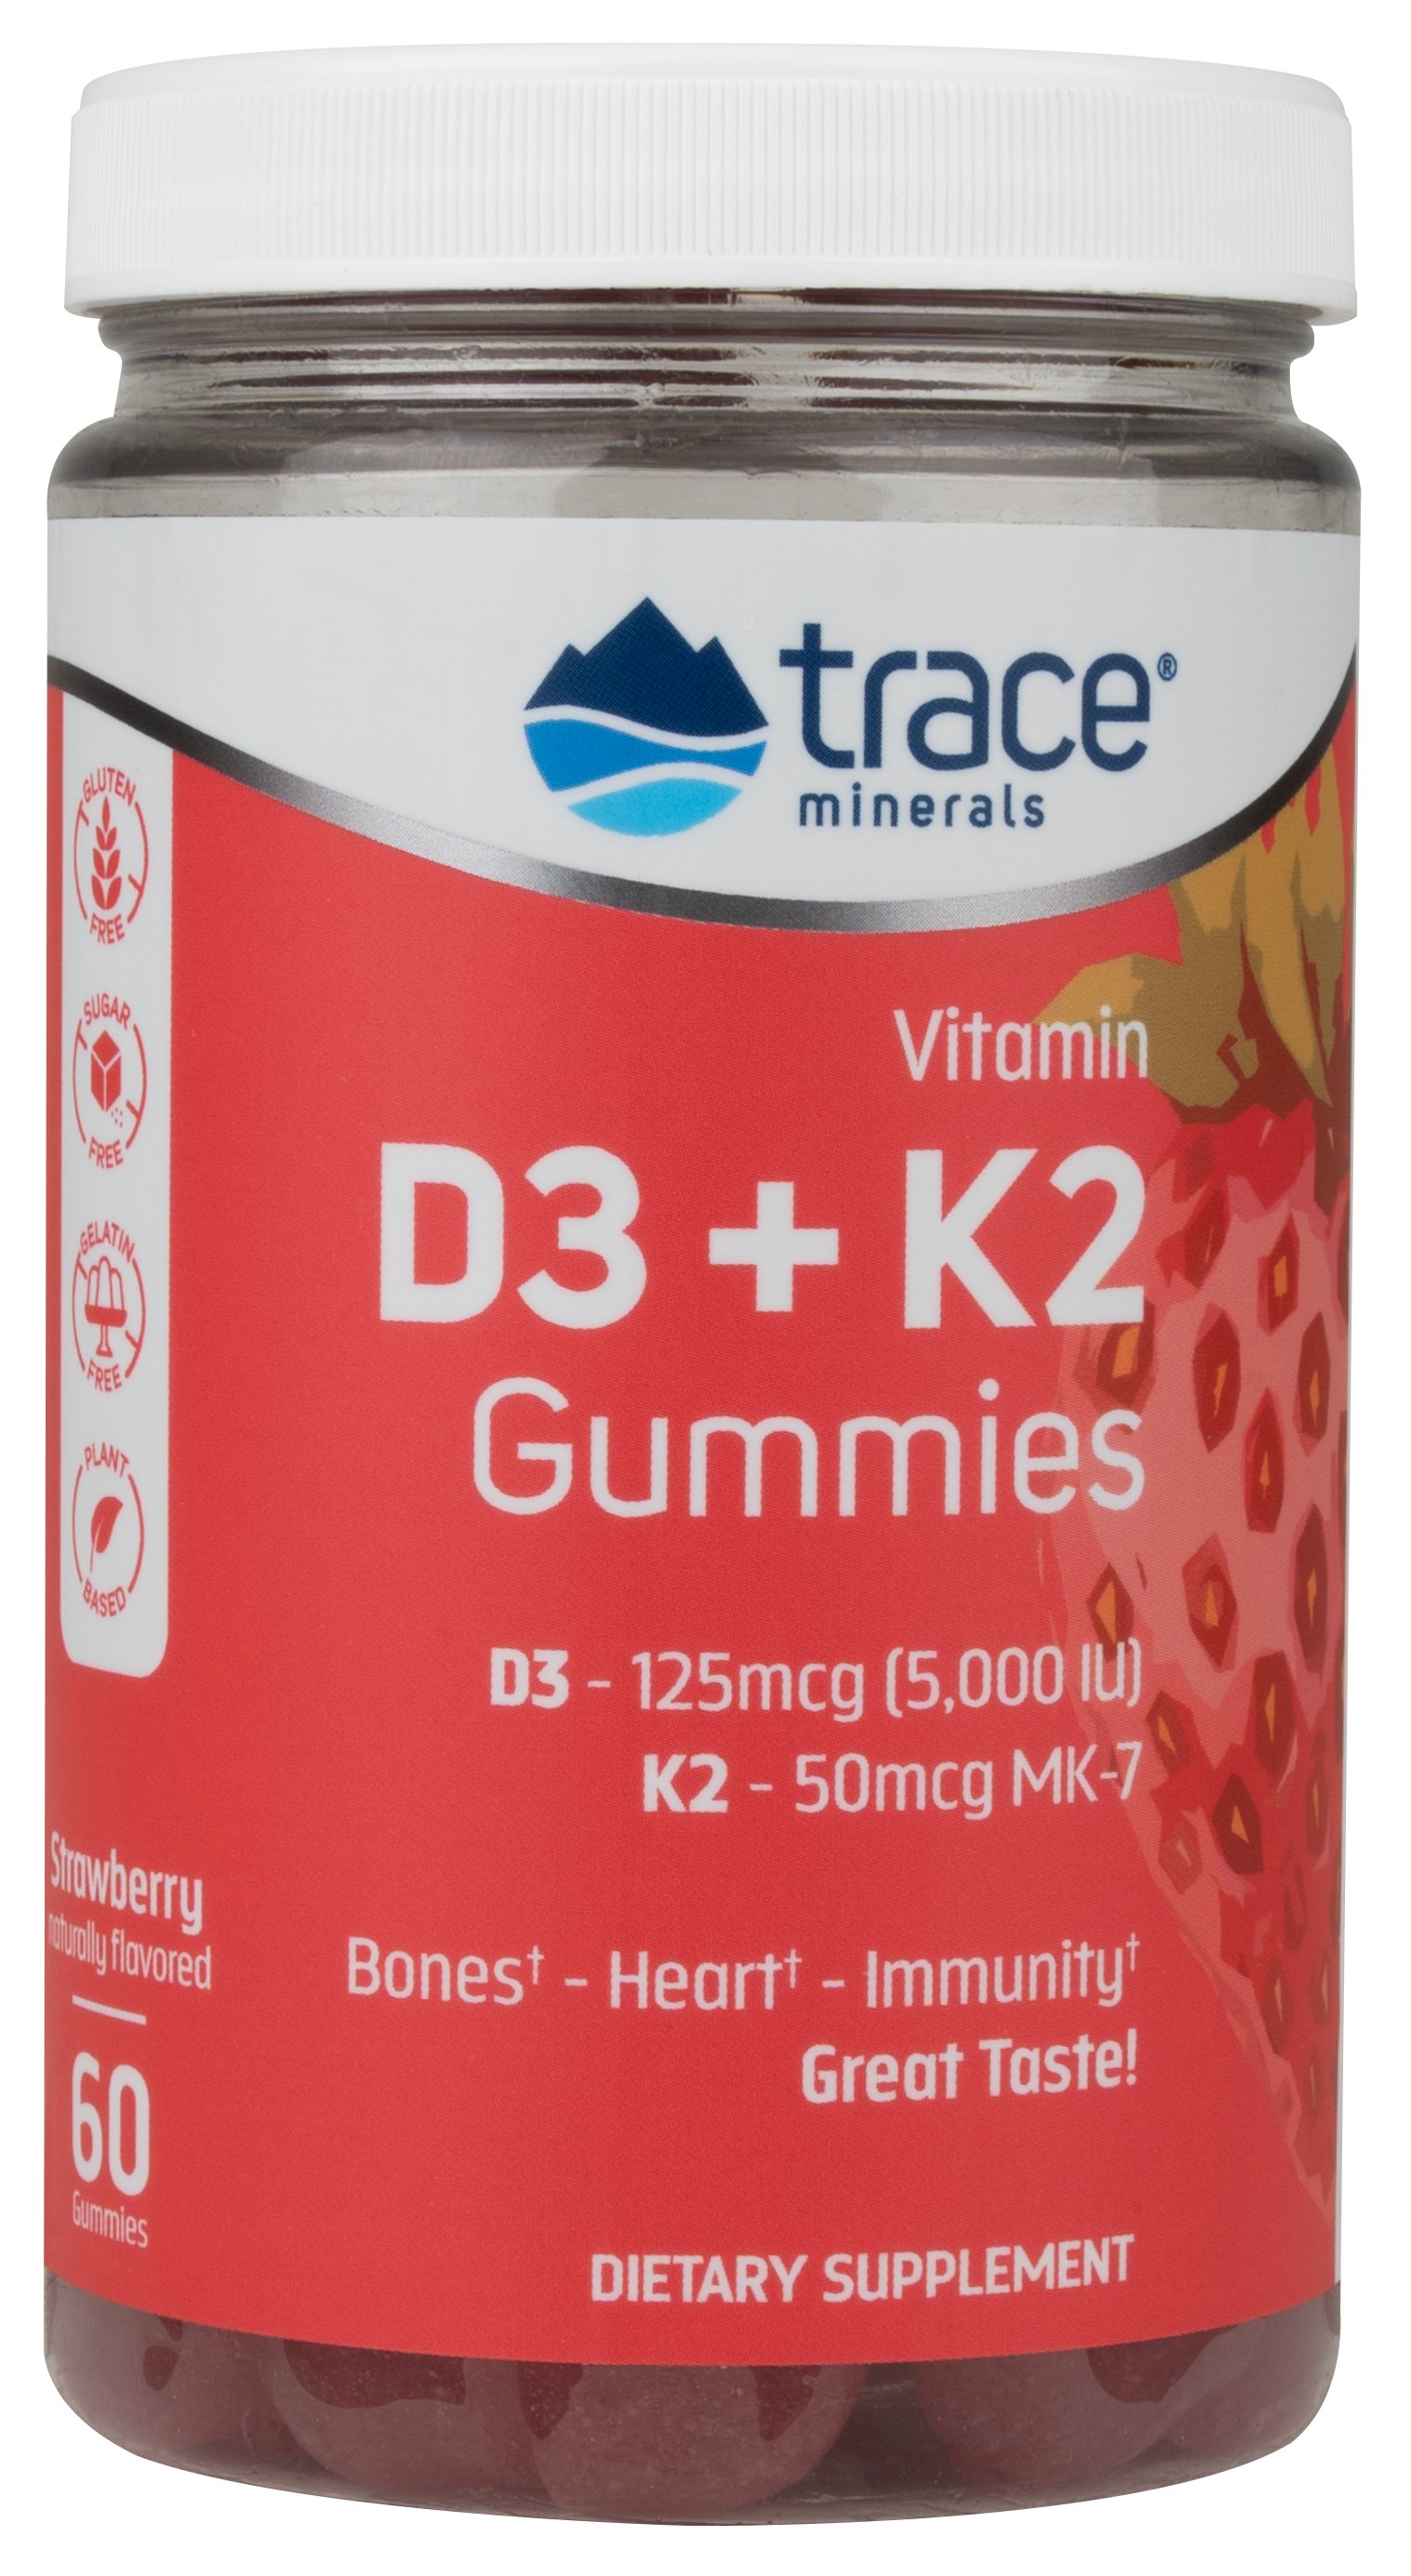 Trace Minerals' D3 + K2 Gummies Wins Supplement Award For Favorite Bone & Joint Product By Delicious Living Magazine